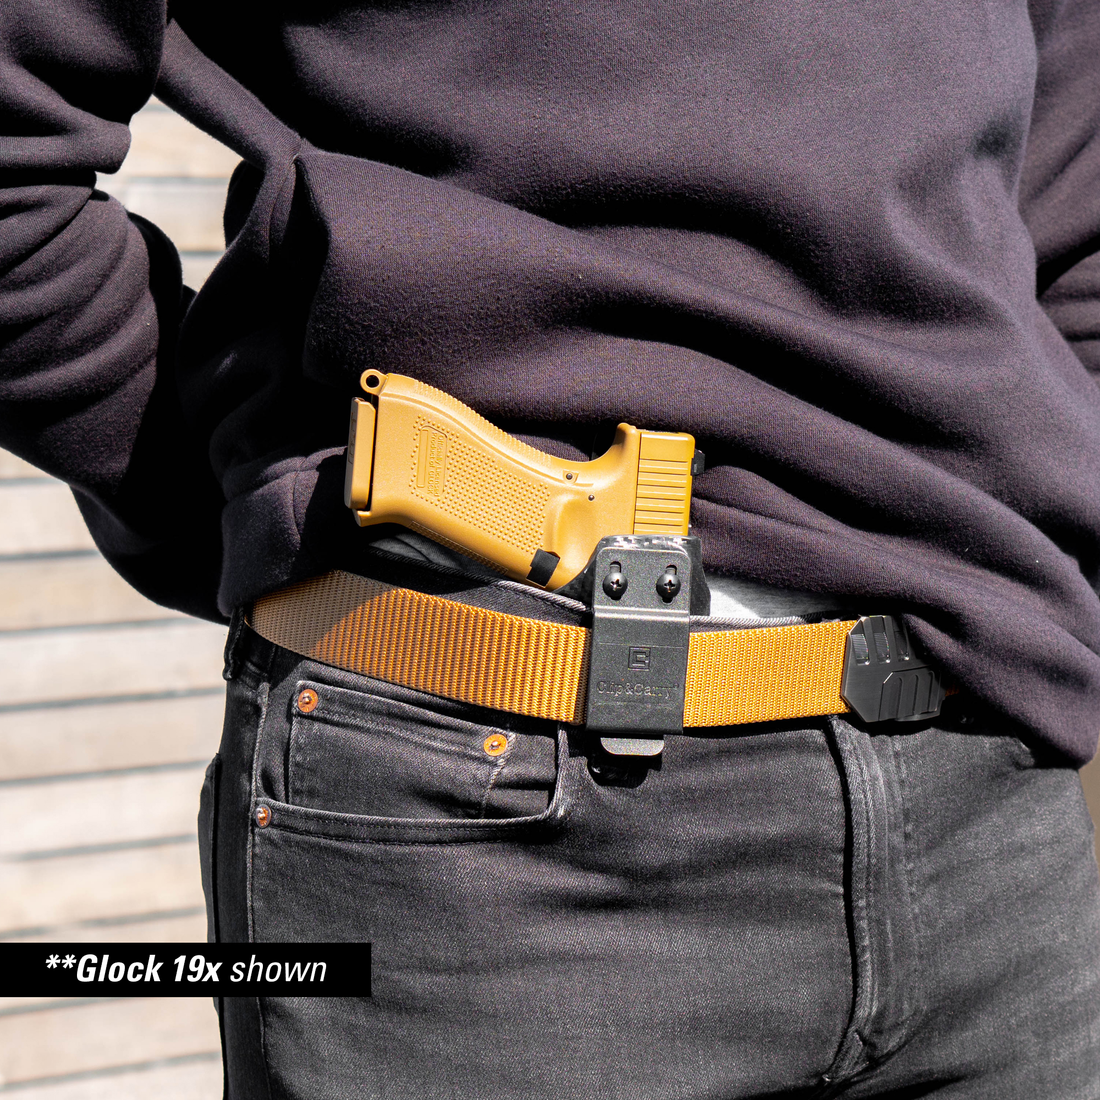 IWB Kydex Gun Holster: The Best Way to Conceal Your Weapon Clip & Carry